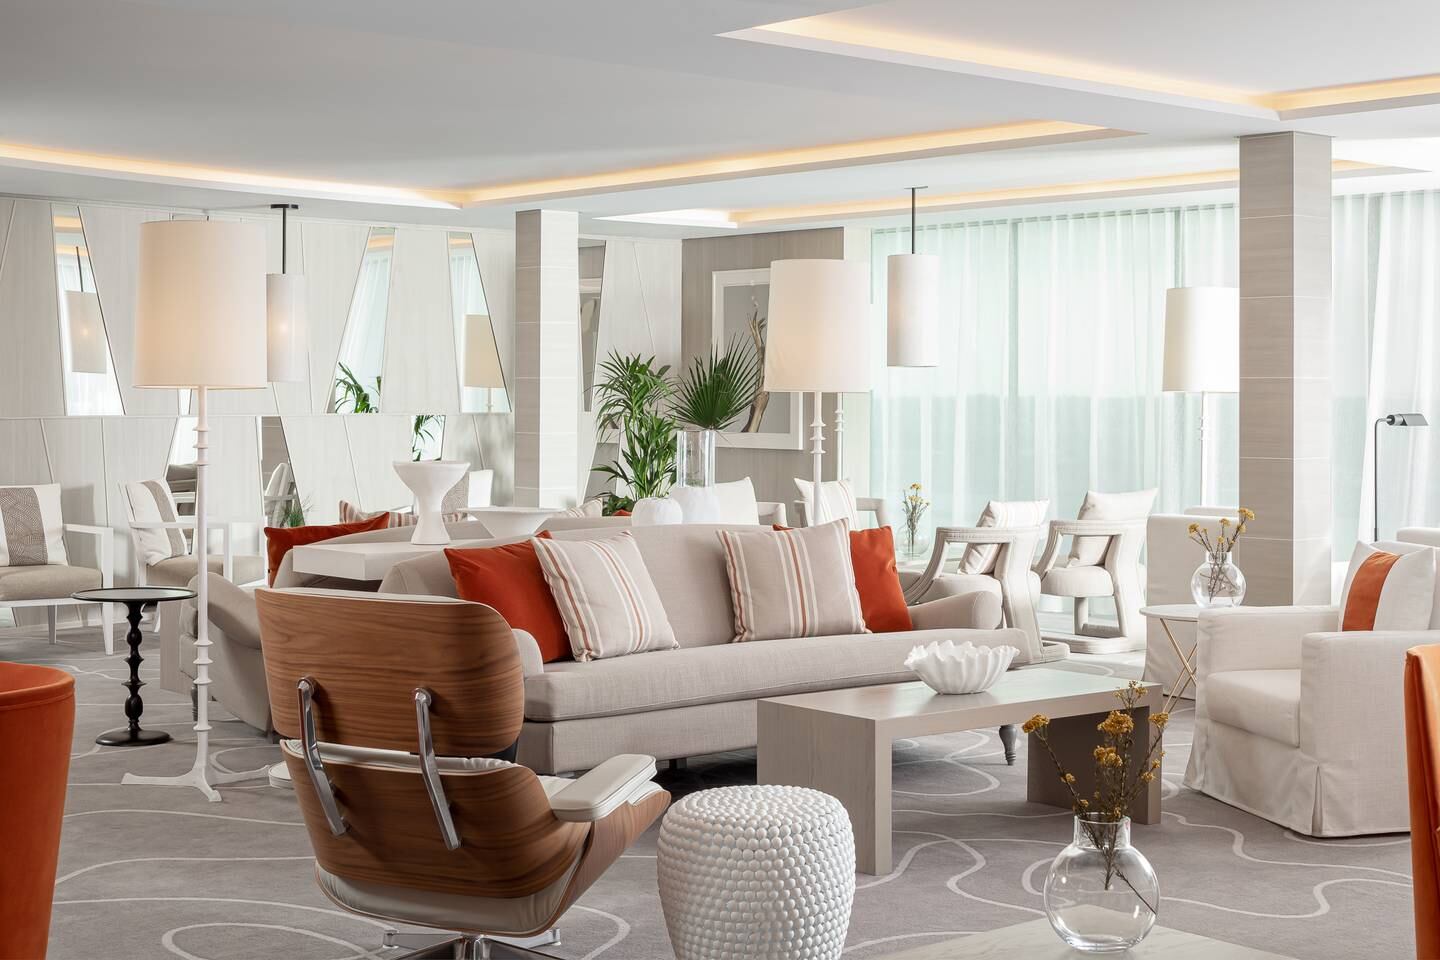 The Retreat Lounge in the 'Celebrity Beyond', designed by Kelly Hoppen. Photo: Kelly Hoppen